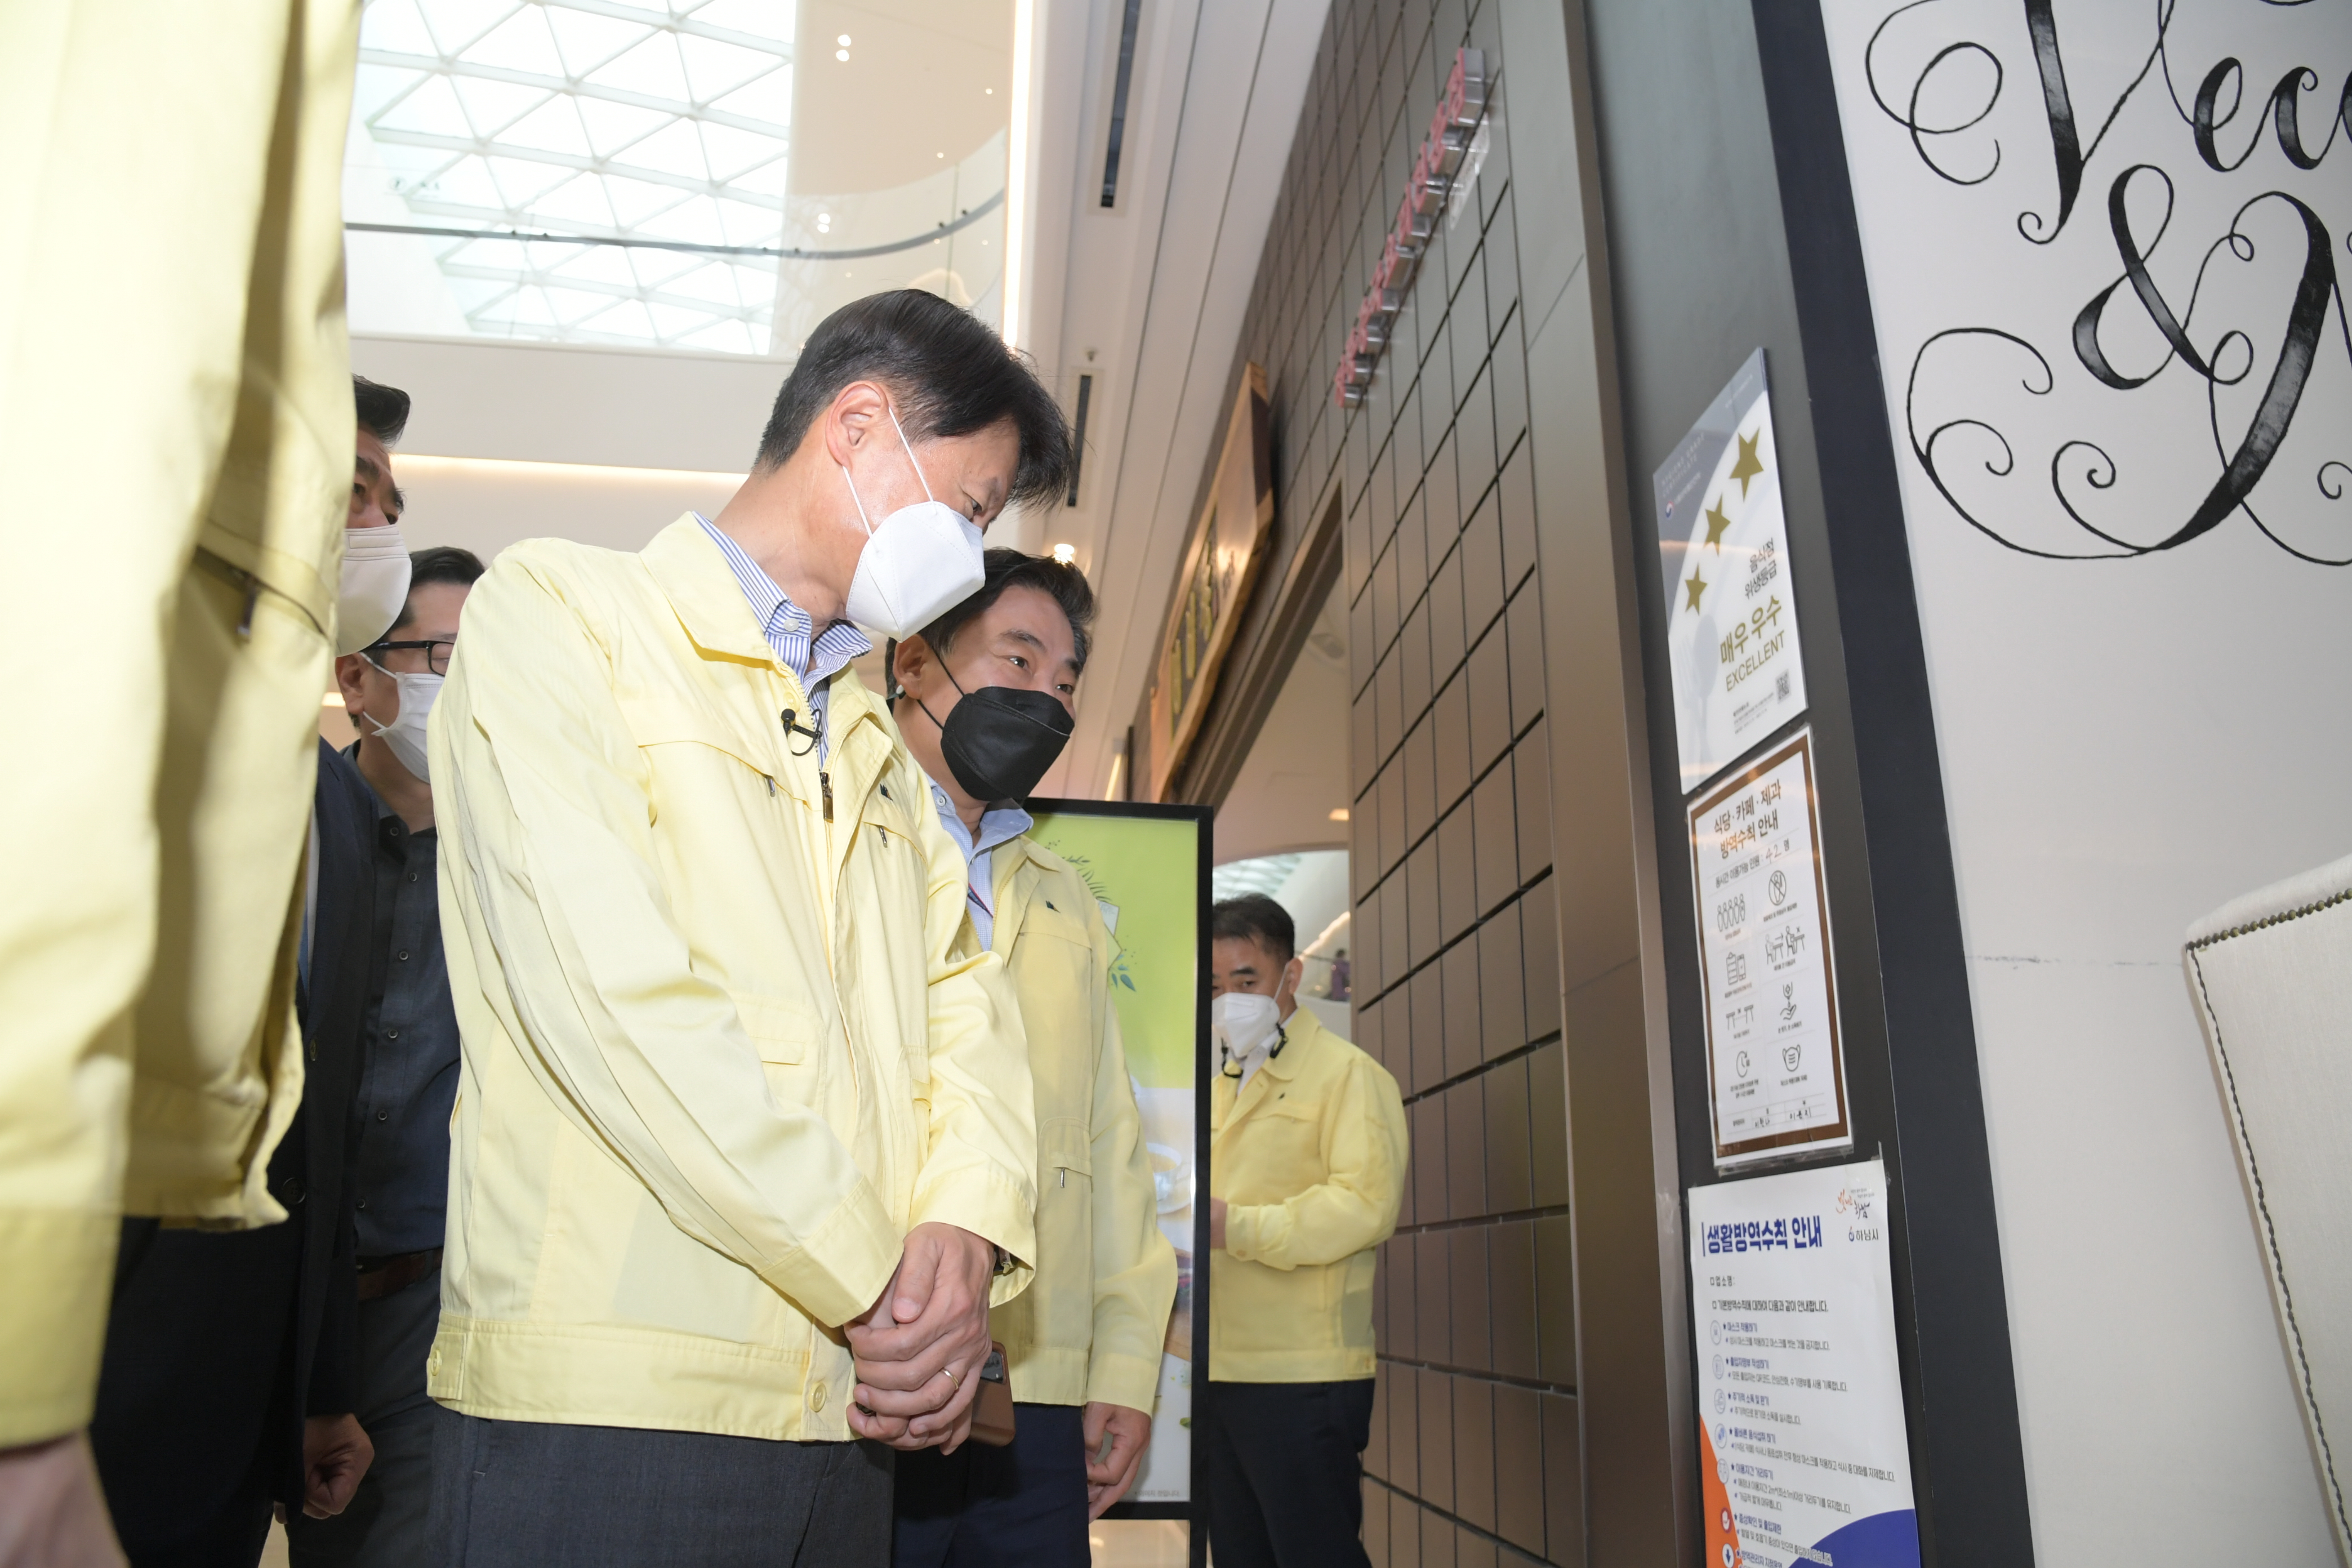 Photo News3 - [April 24, 2021] Minister inspects restaurants to check COVID-19 anti-epidemic measures